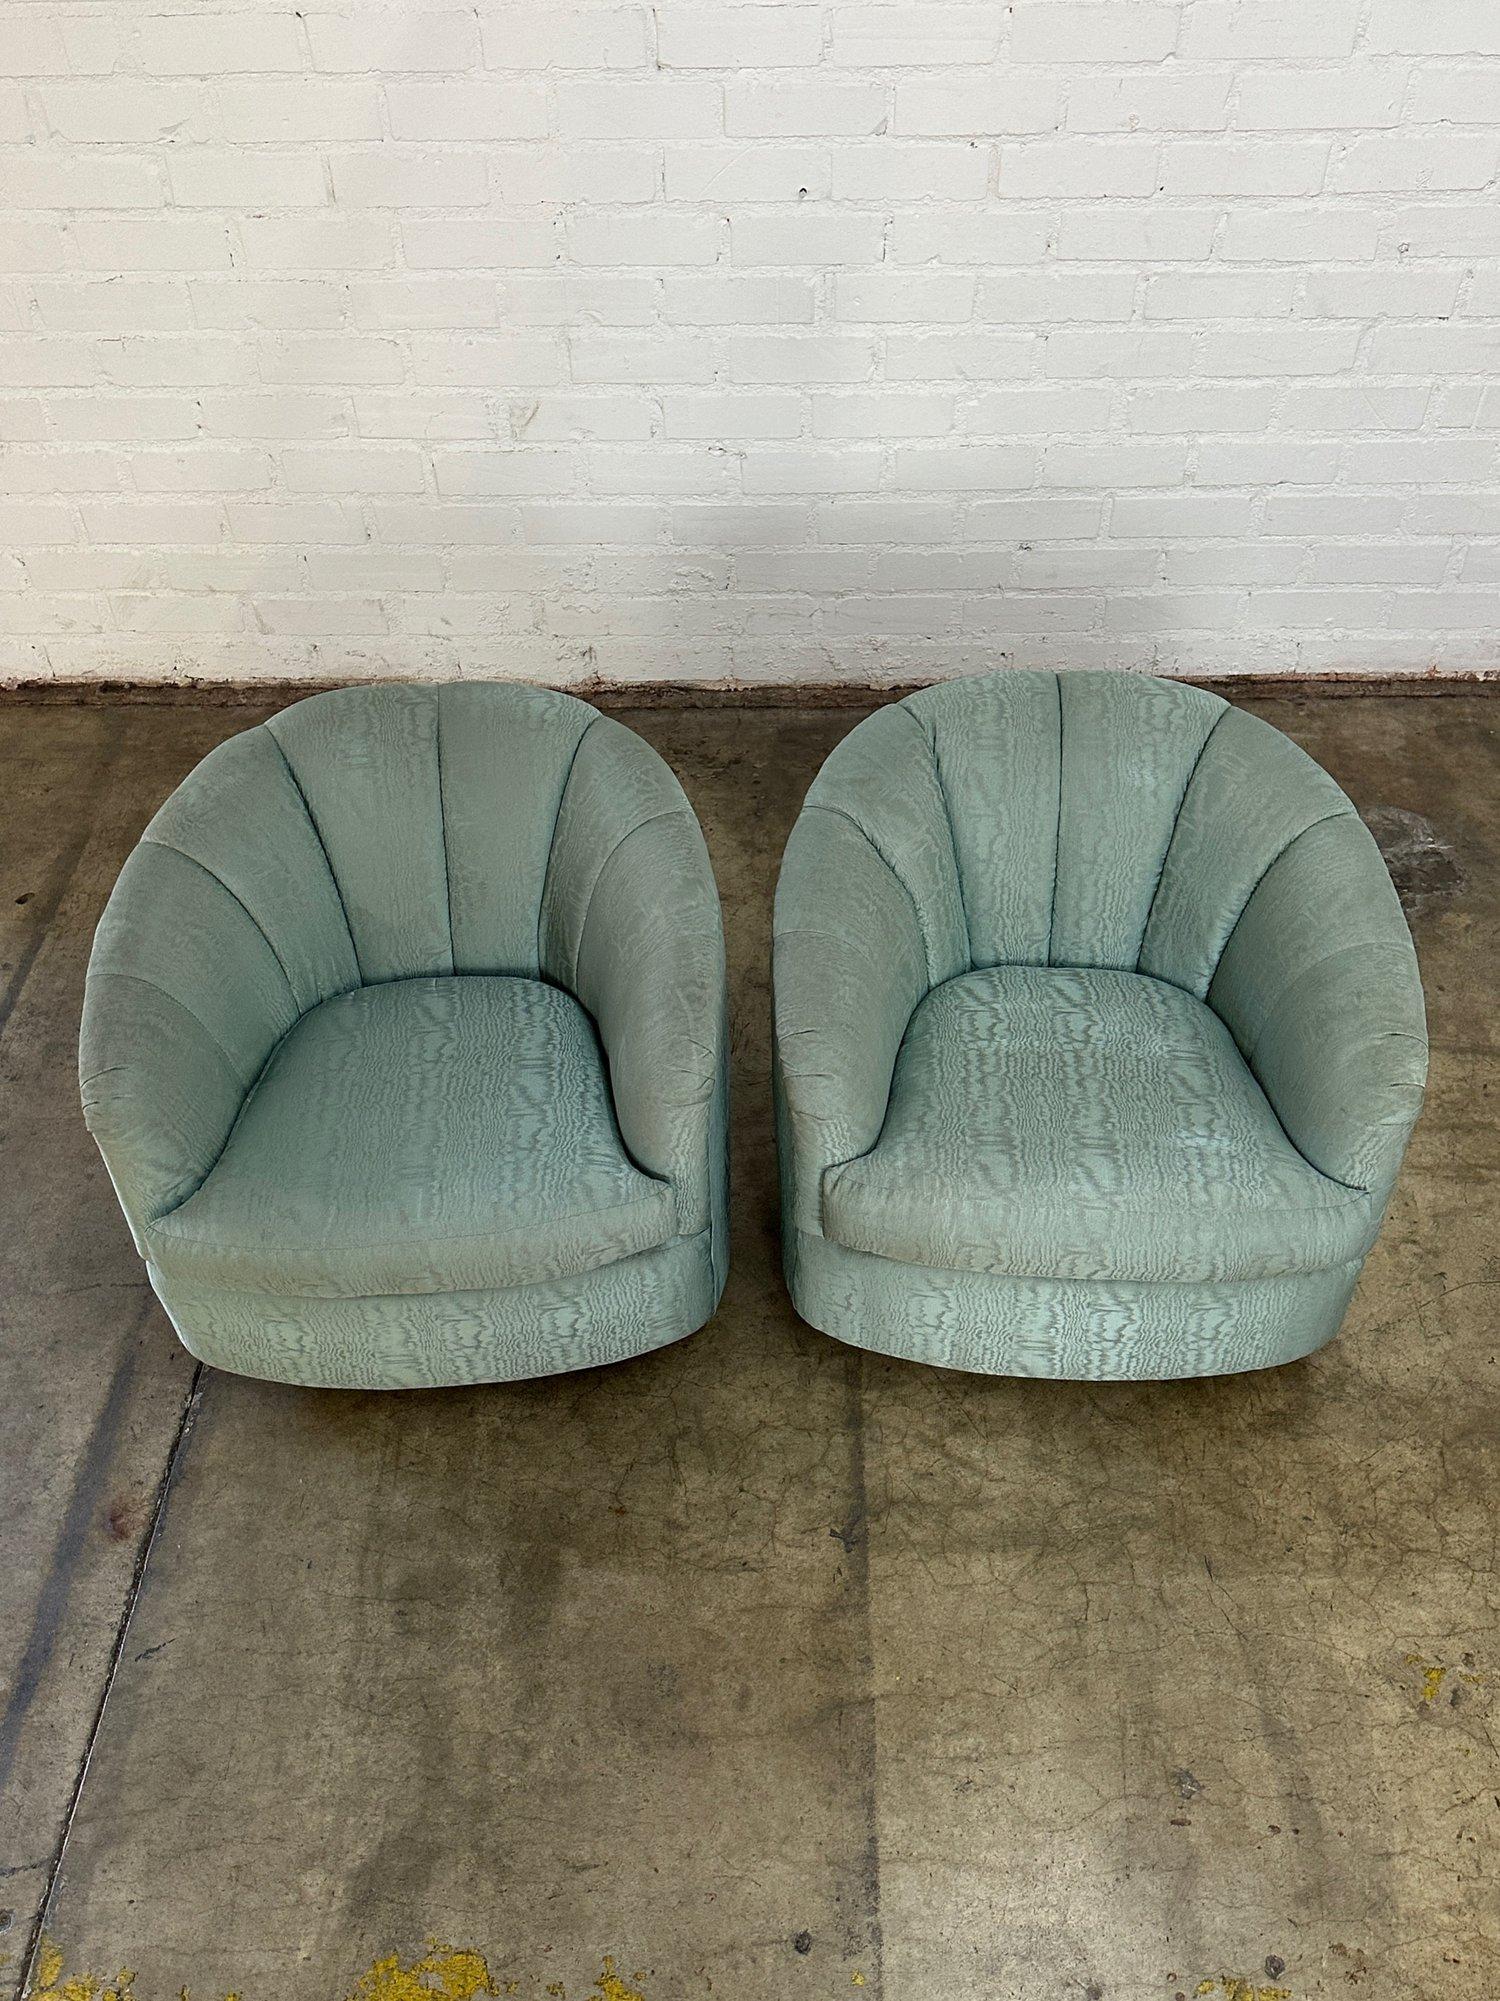 W30 D35 H25 SW19 SD20 SH16.5 AH22

Ottoman W21 D21 H17.5

Fun Vintage Set of Swivel Barrel Chairs with back channel detail. The set comes with one matching ottoman. All three units shows well in original fabric with no stains or rips. Price is for